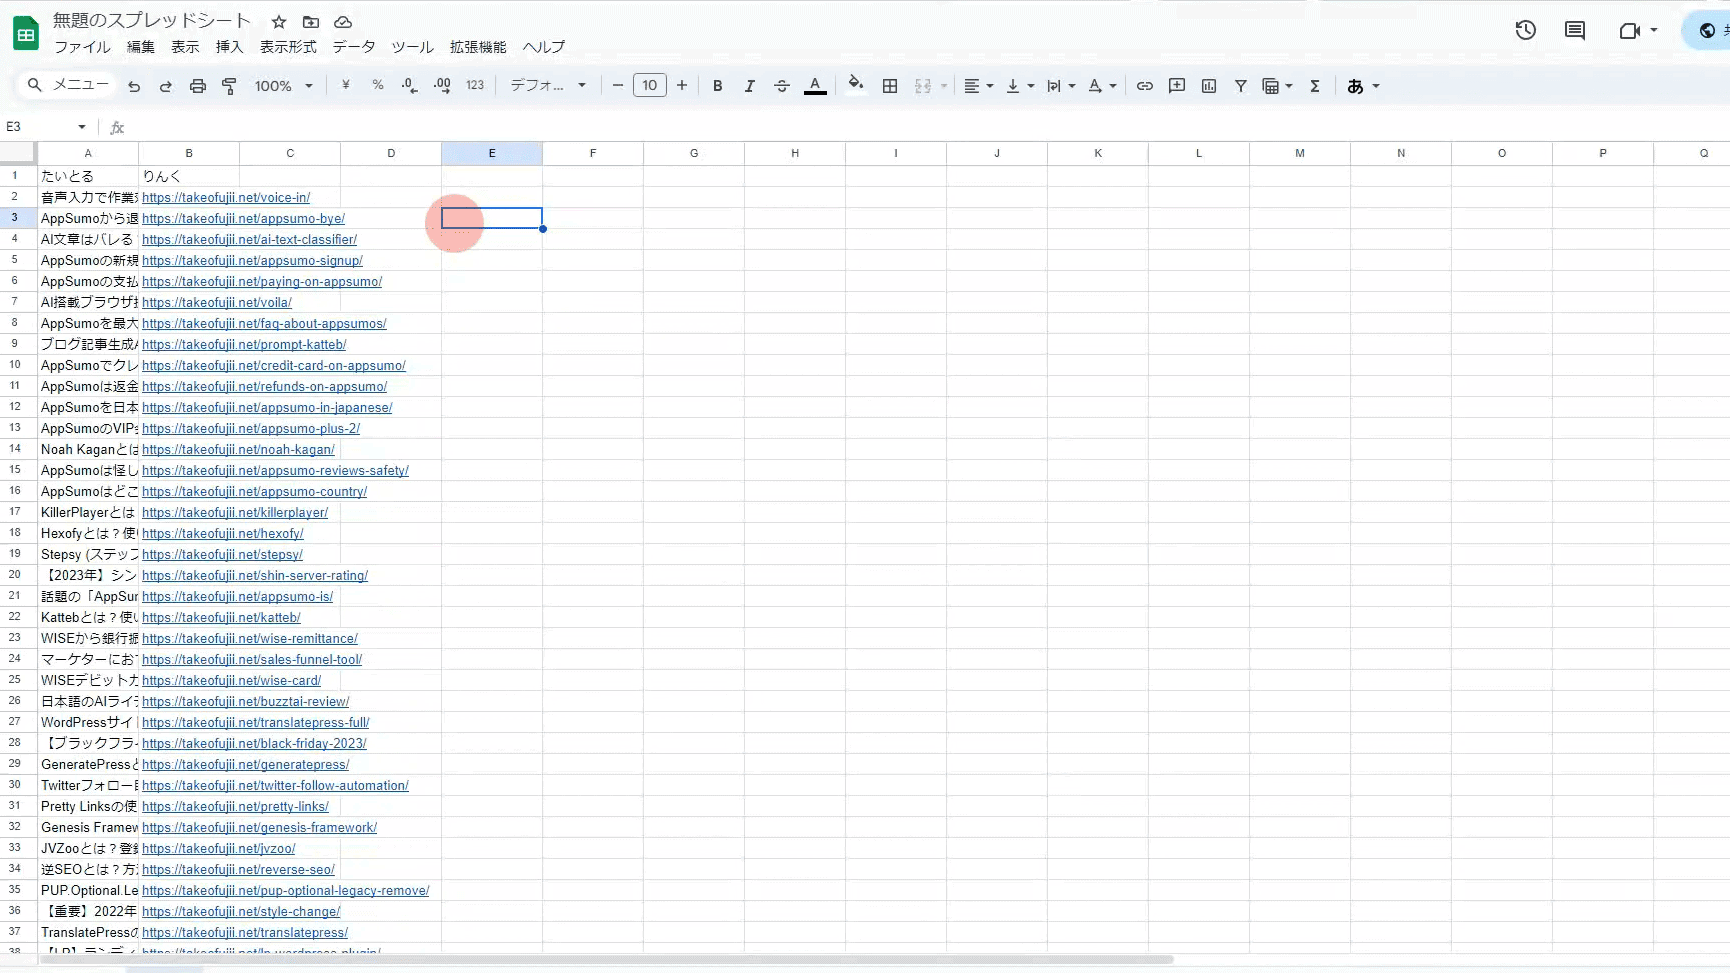 Data acquired with TaskMagic can also be exported to a Google Spreadsheet